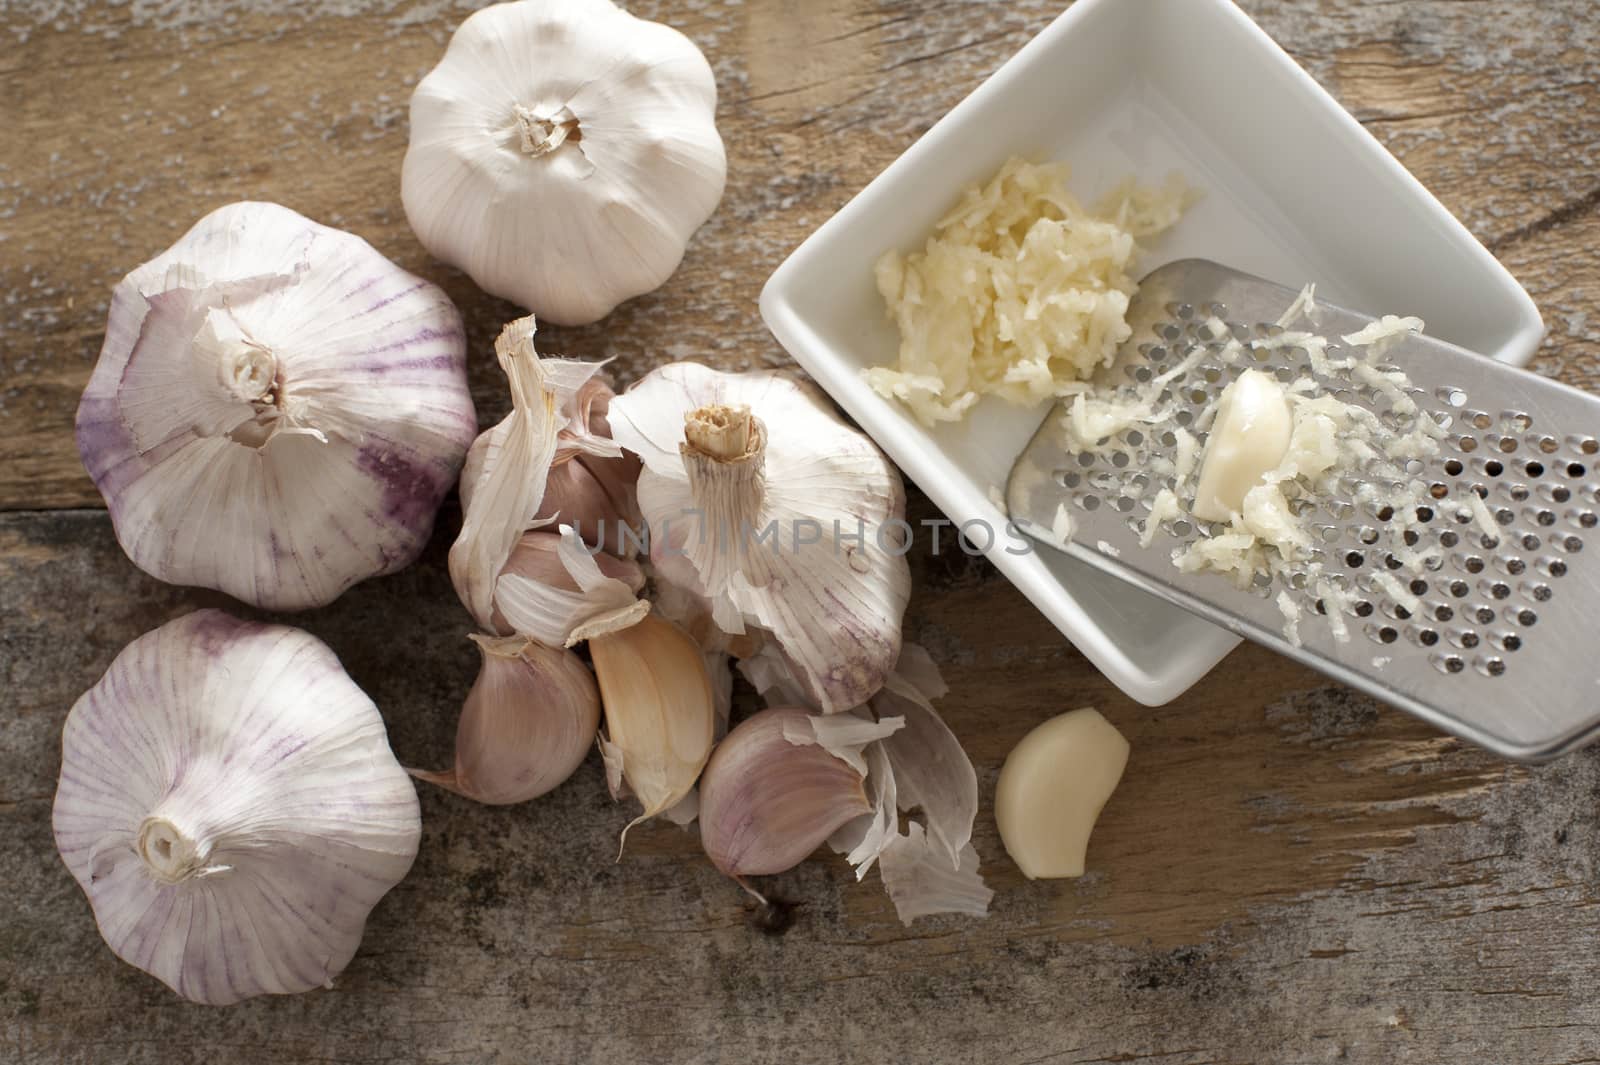 Four garlic bulbs beside a white square bowl holding shredded cloves and stainless steel grater